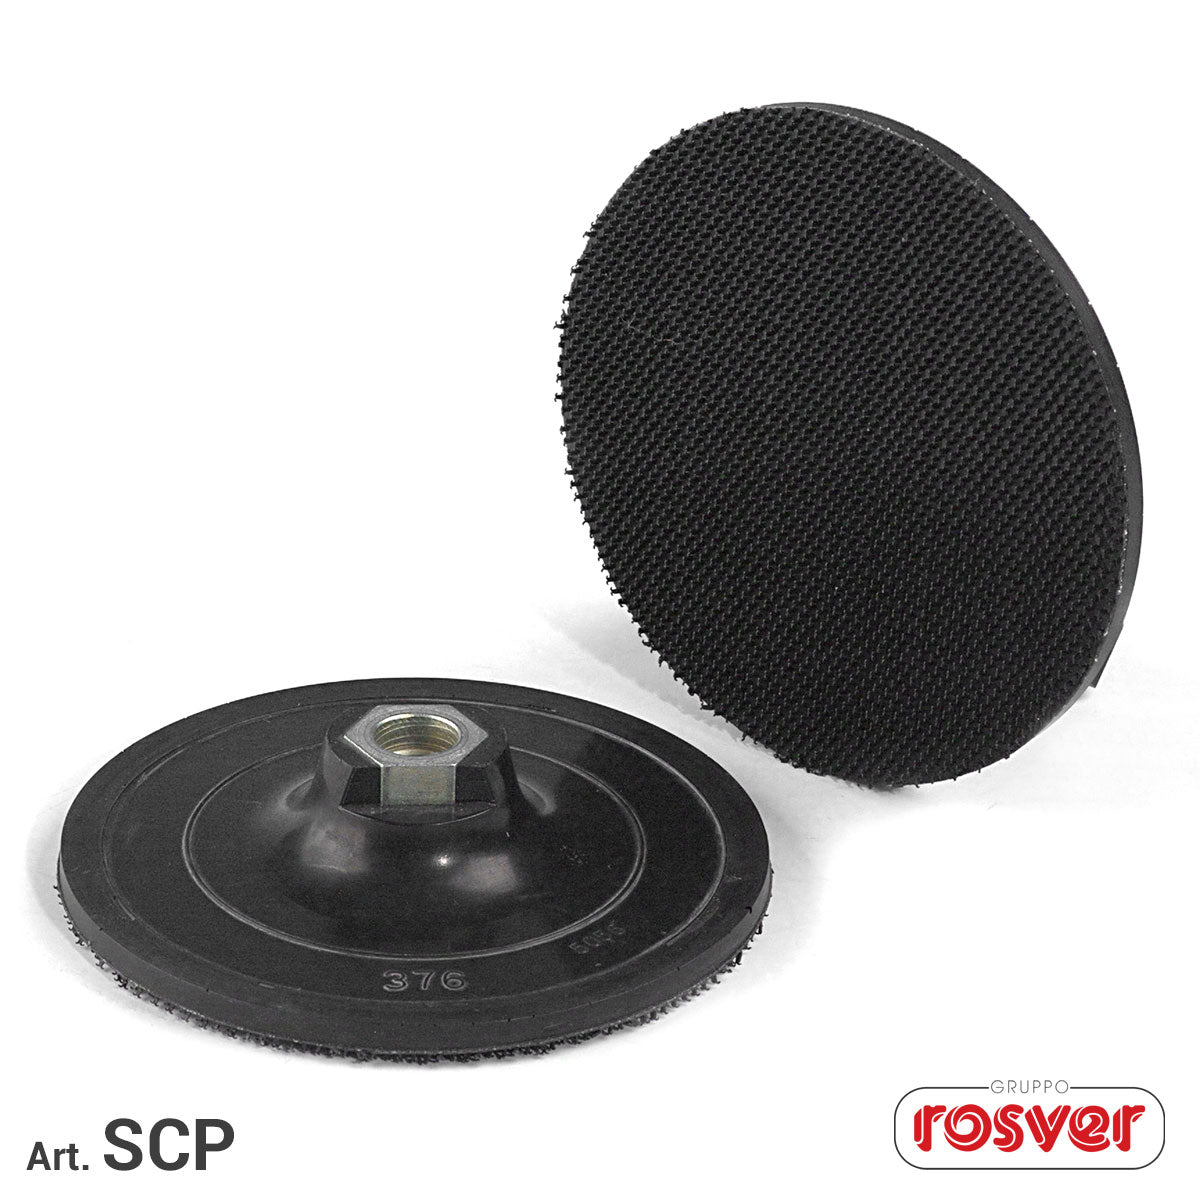 Backing Pads - Rosver - SCP - Conf.1pz